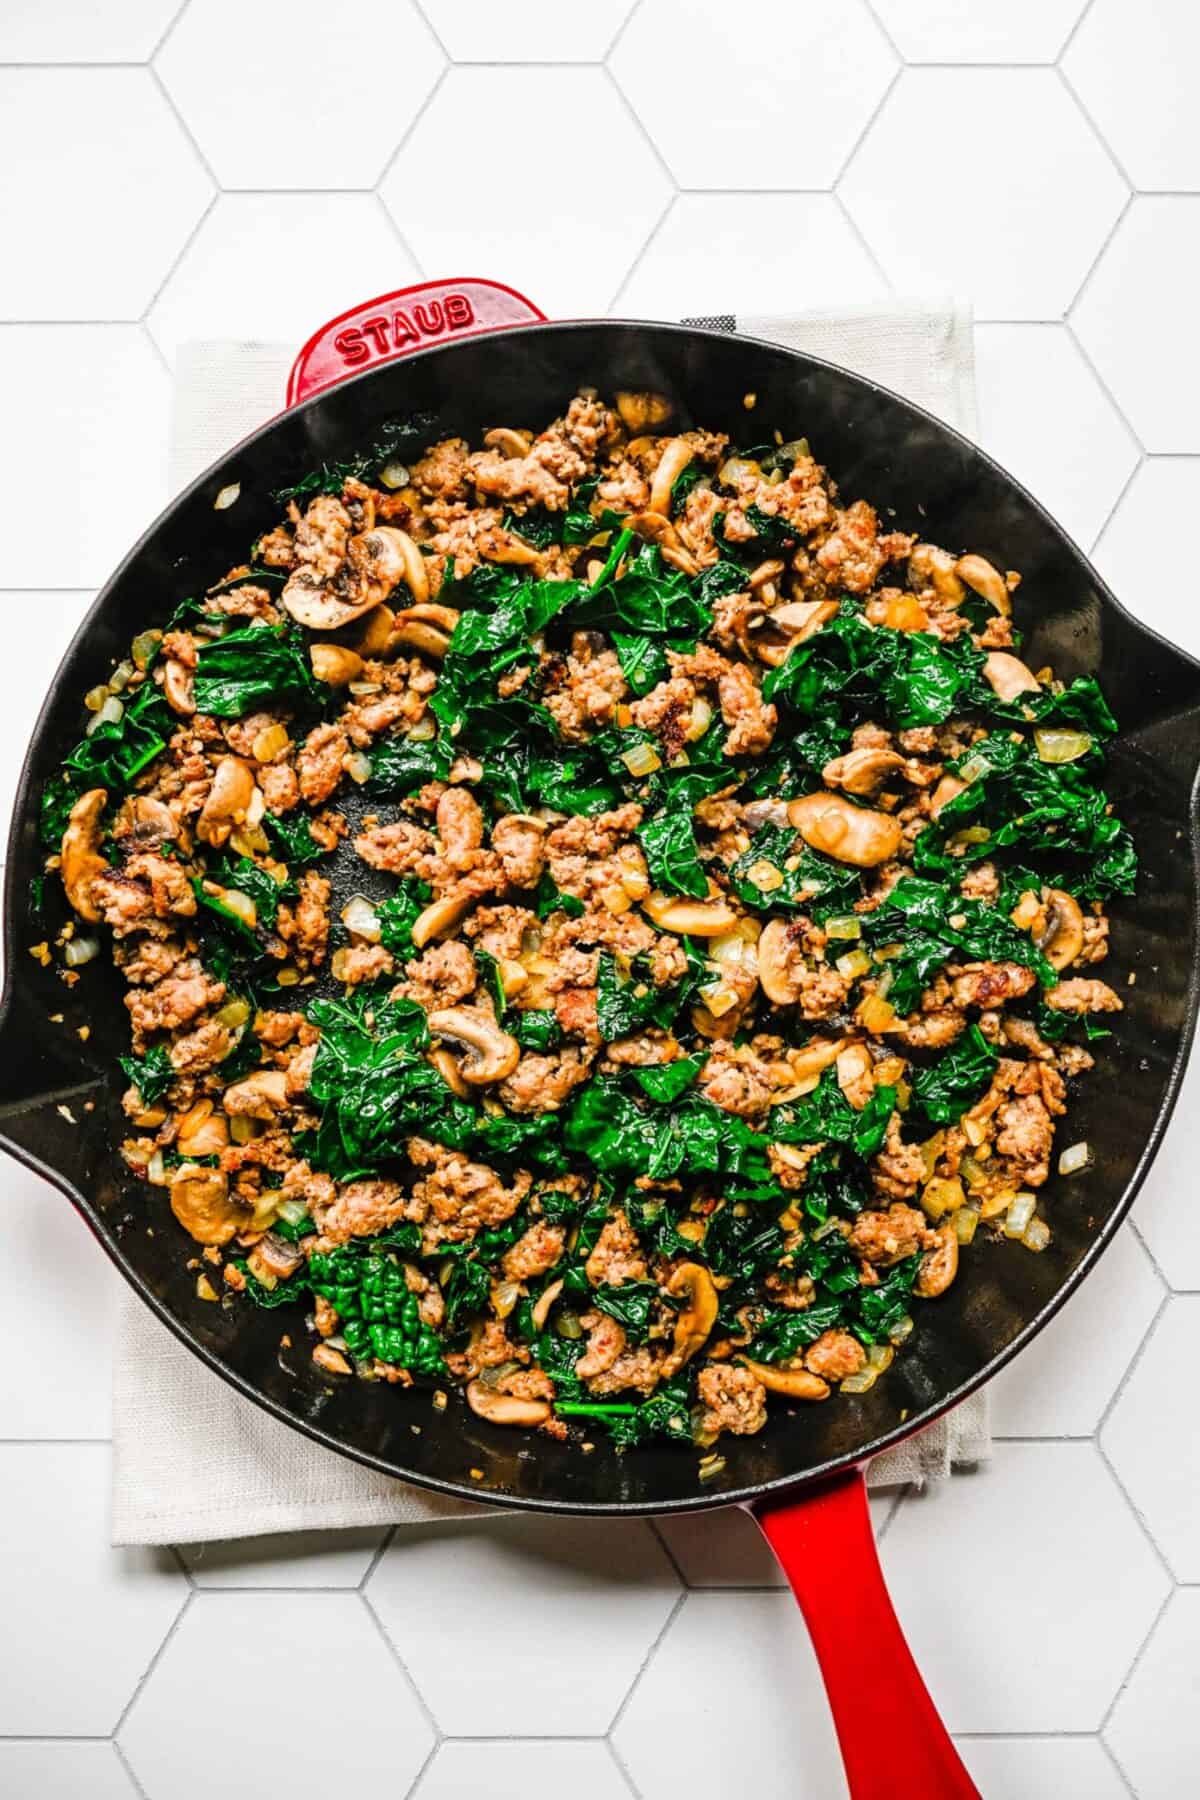 A skillet filled with broken up Italian sausage, kale, mushrooms, onion, and garlic, cooked